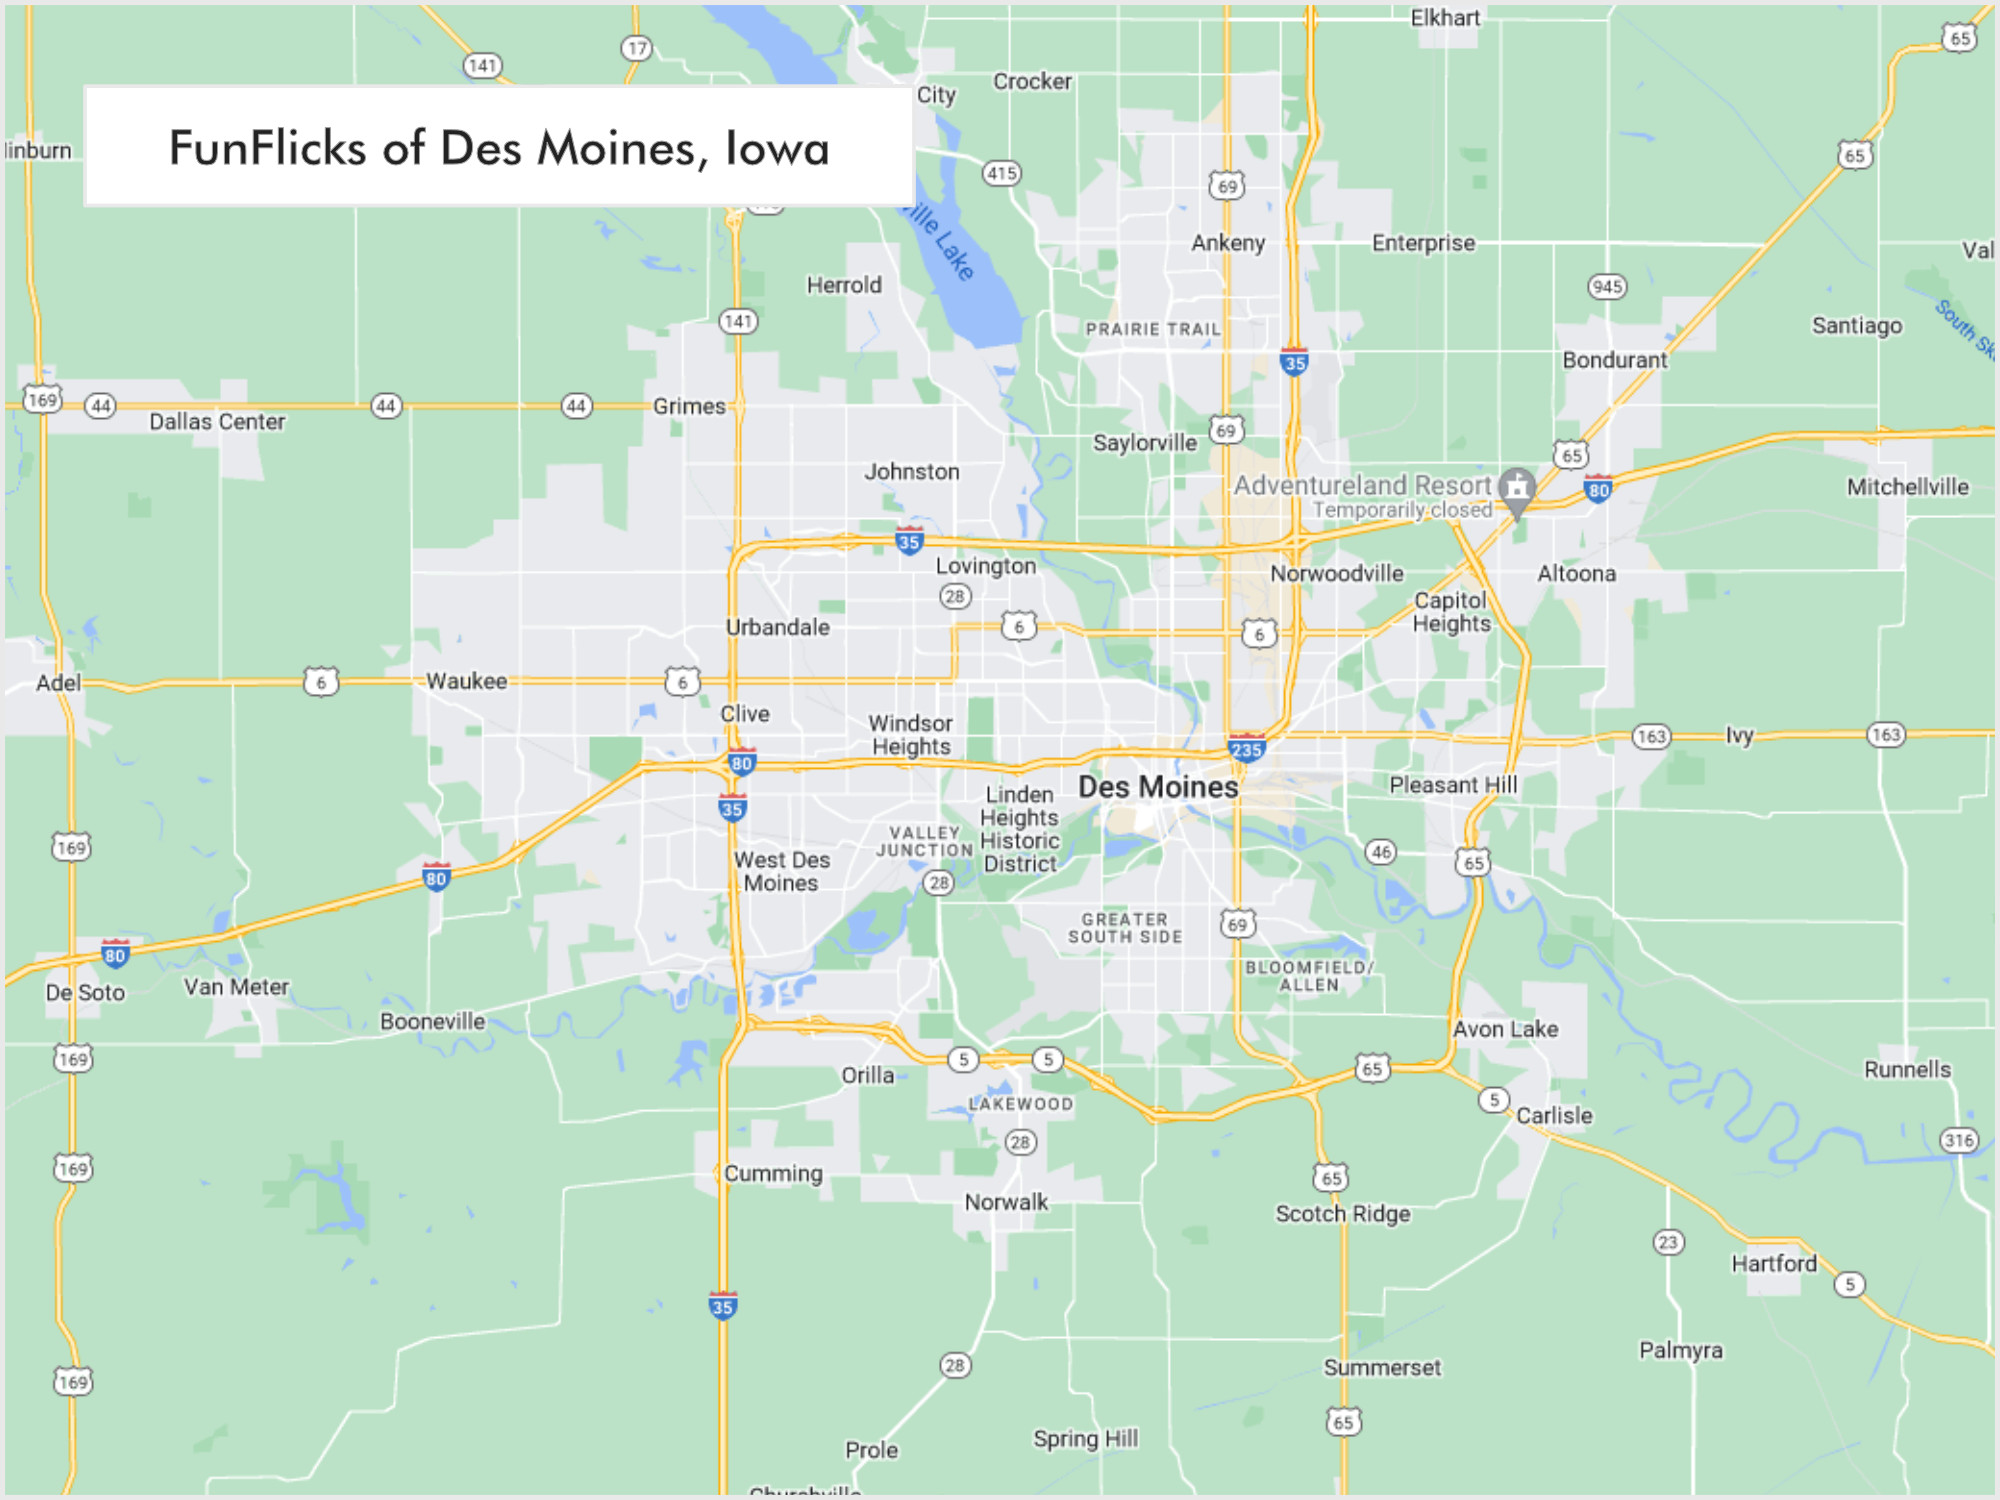 FunFlicks® Des Moines territory map